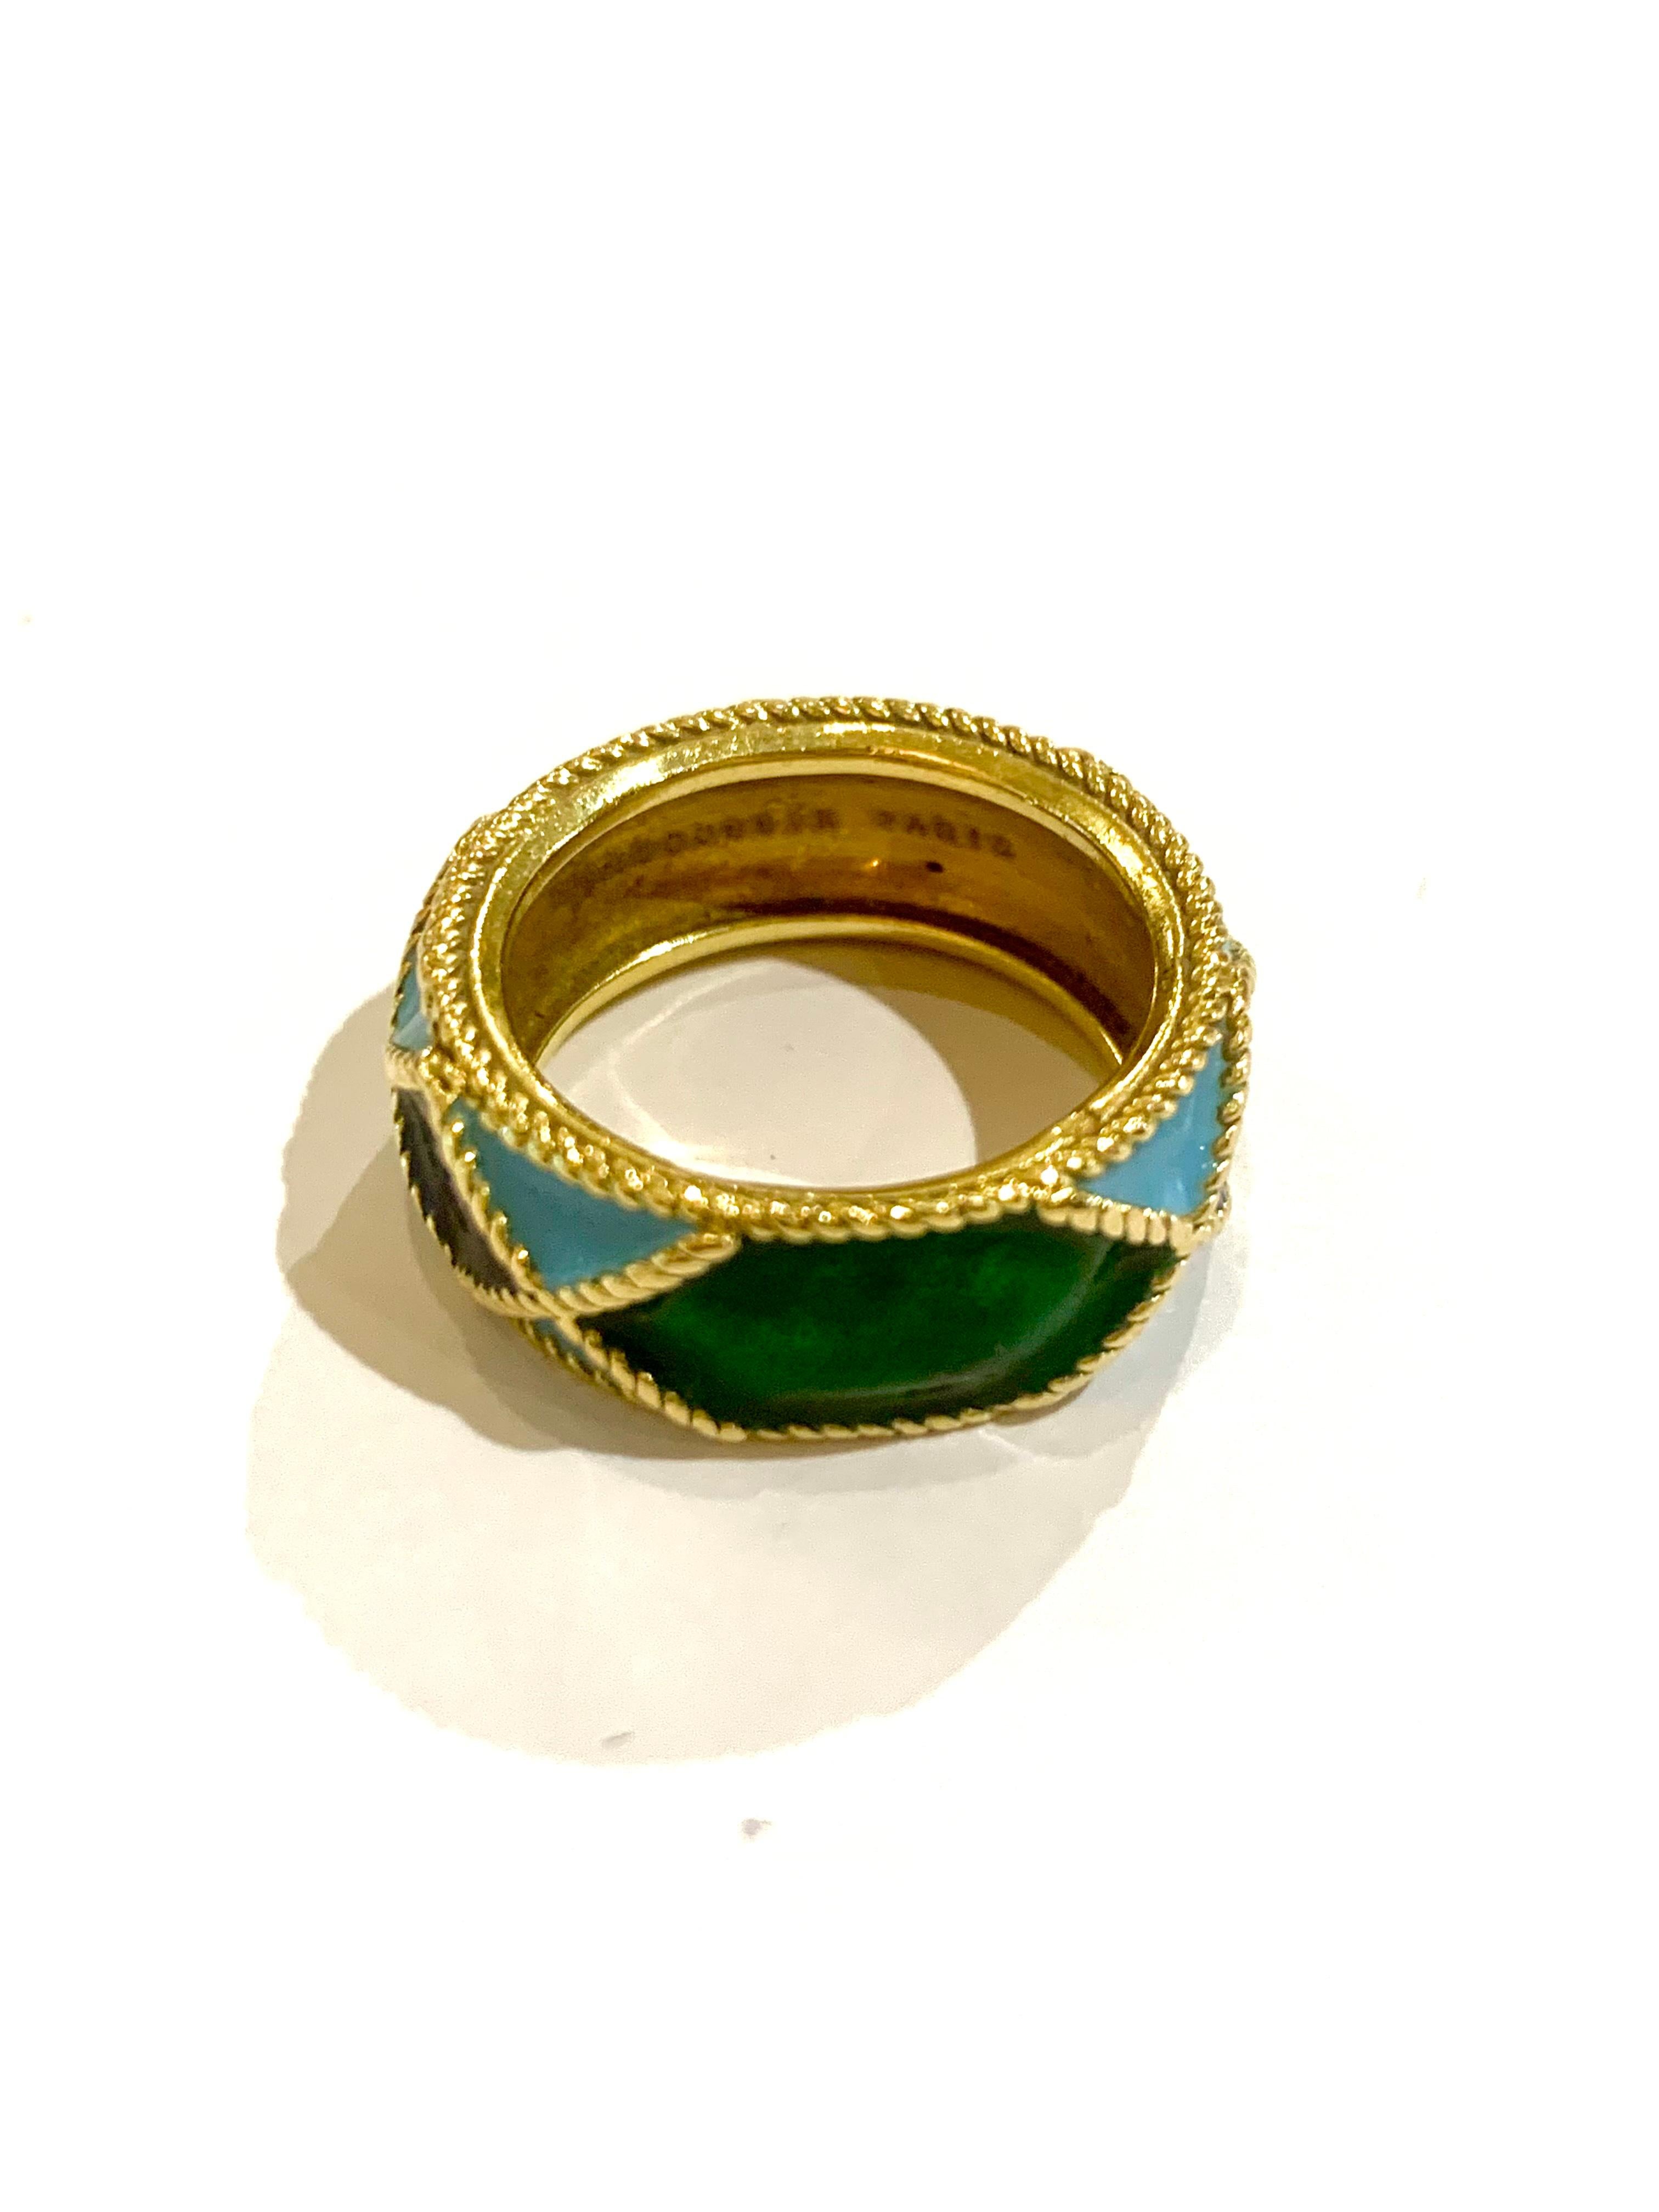 Vintage yellow gold ring signed Mauboussin Paris and numbered, the full band enamelled in shades of blue and green in a fine rope motif.

Signed Mauboussin Paris and numbered.

Dimensions: 8.13 x 2.38 mm (0.320 x 0.094 inch)

Finger size : 51.5 (US